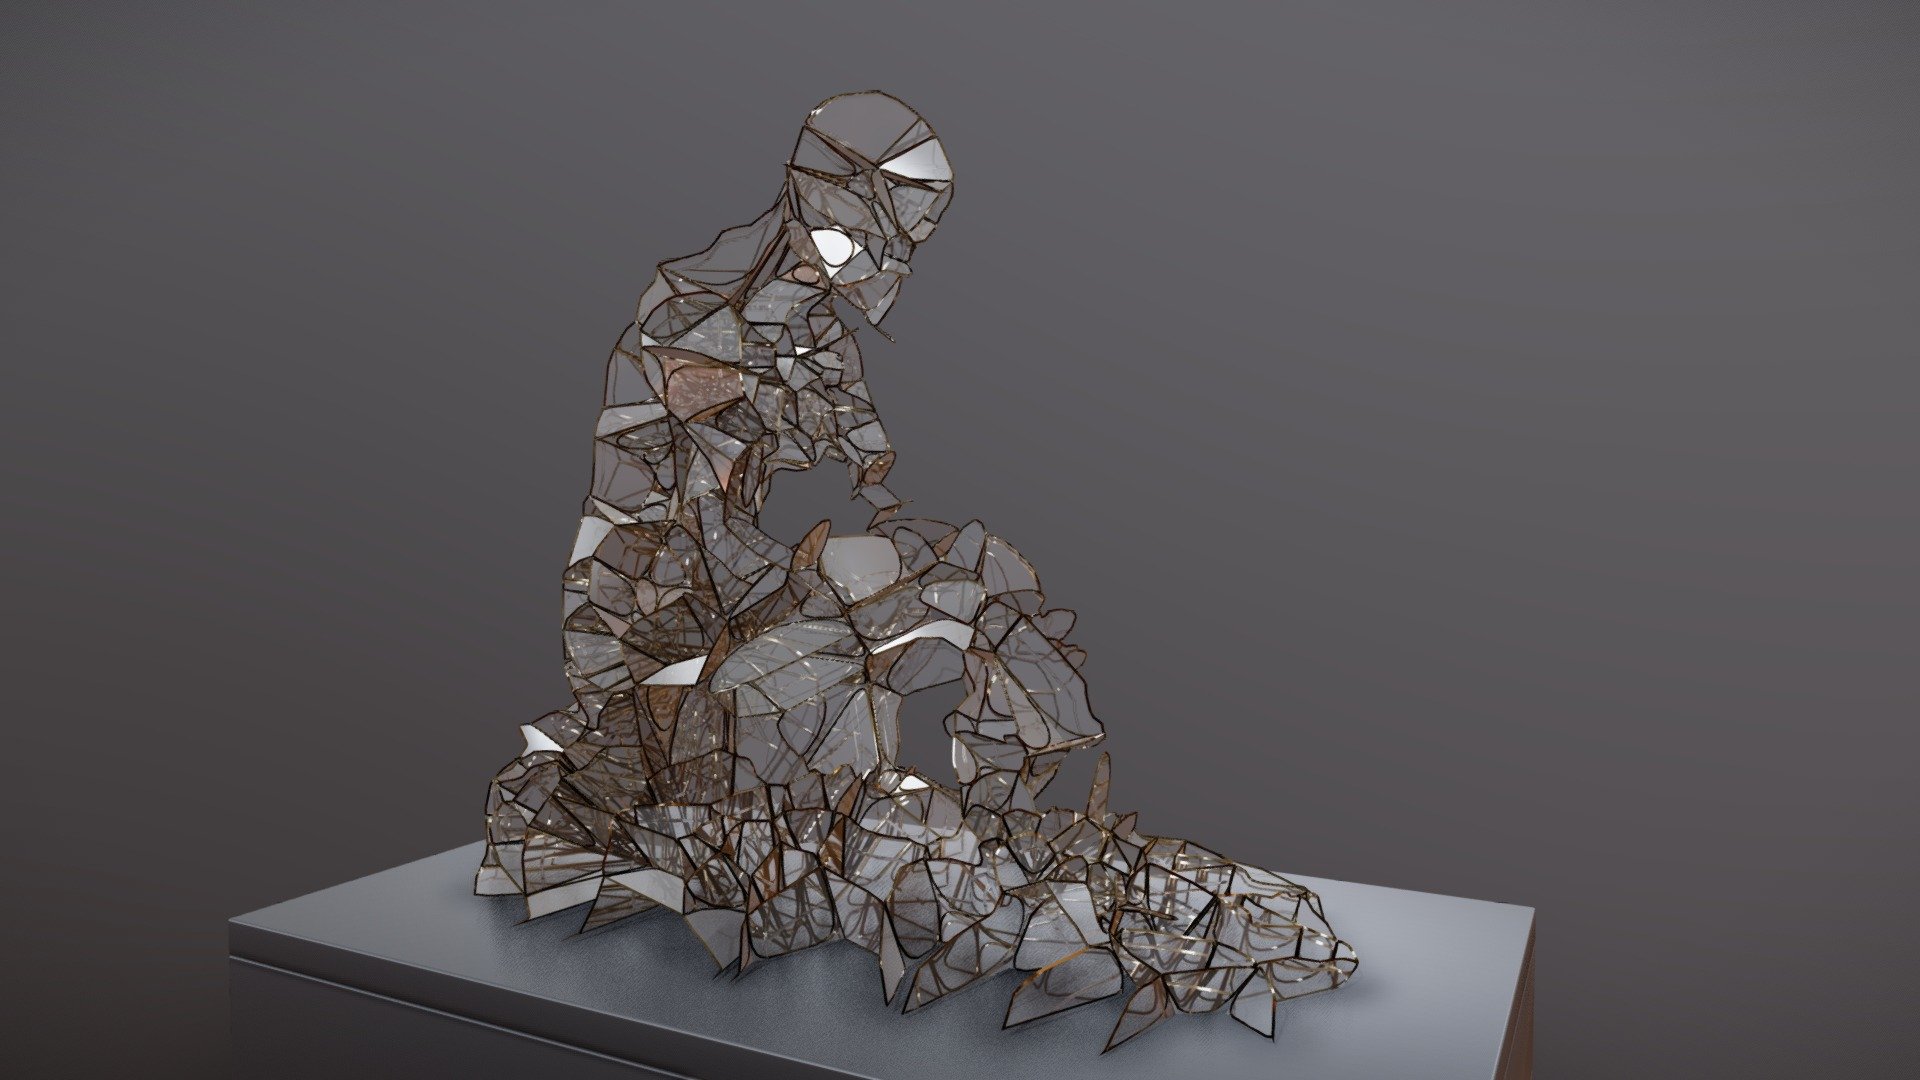 https://youtu.be/cWuvb_lunJI another quick tutorial by Entagma, this to experiment with abstract art to have in a gallery.

https://skfb.ly/oAuxz based on this sculpture

I have setted it up to be textured and have coloured glass, maybe when I get time I will finish it 3d model